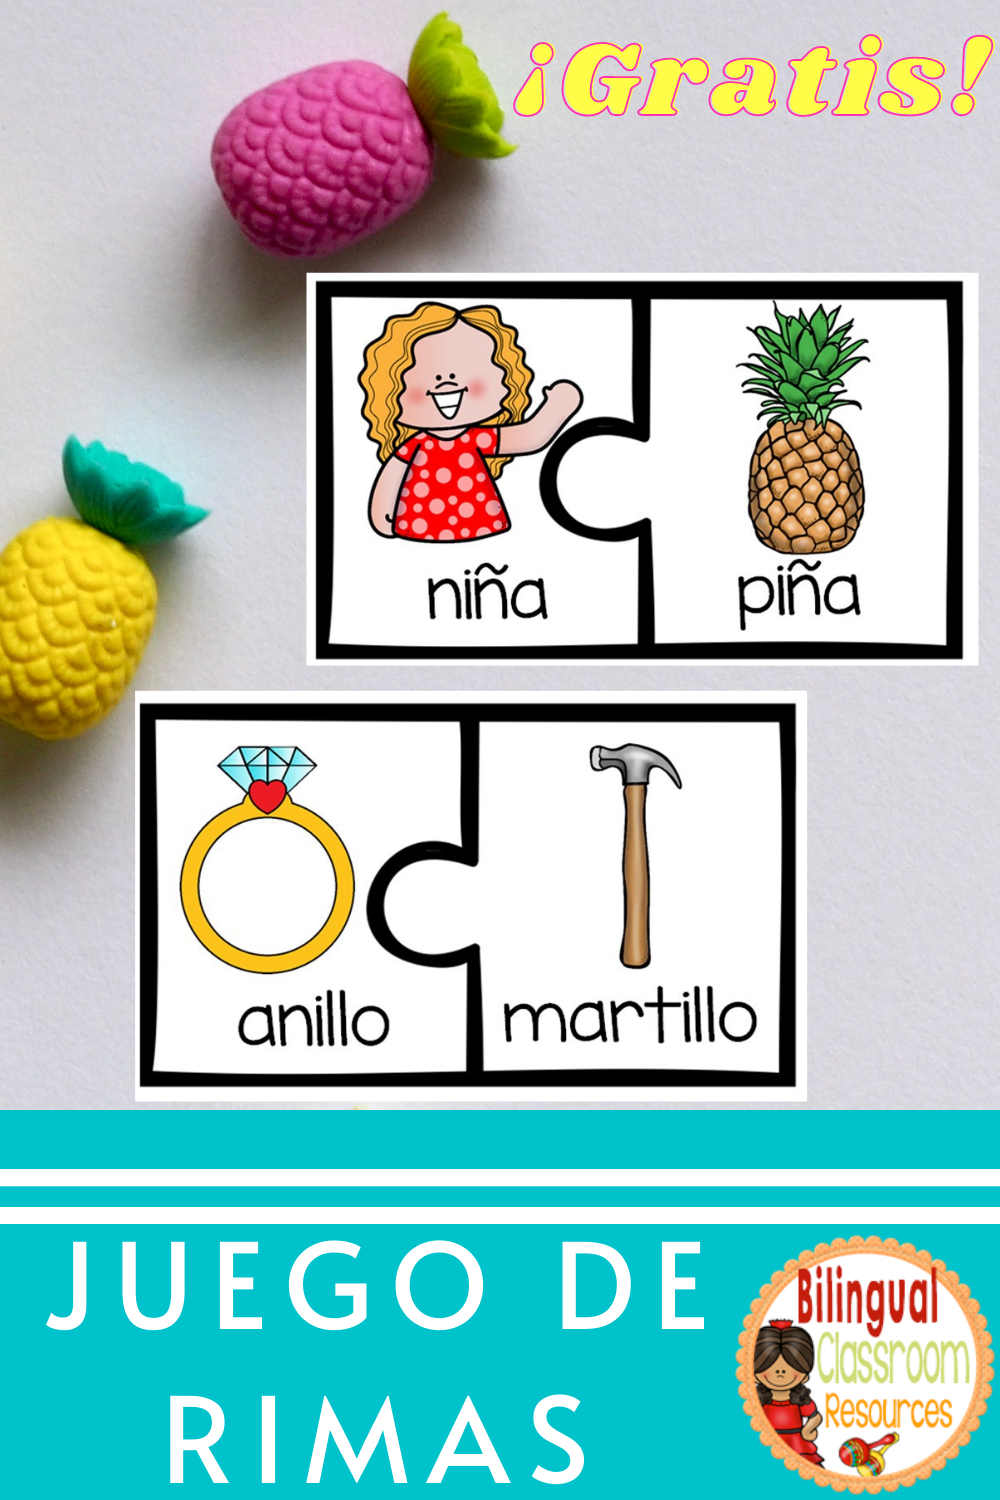 Free Rhyming Puzzles In Spanish  Each puzzle piece has picture and word of the item shown.  This activity can be completed in pairs, individually or during small group instruction.